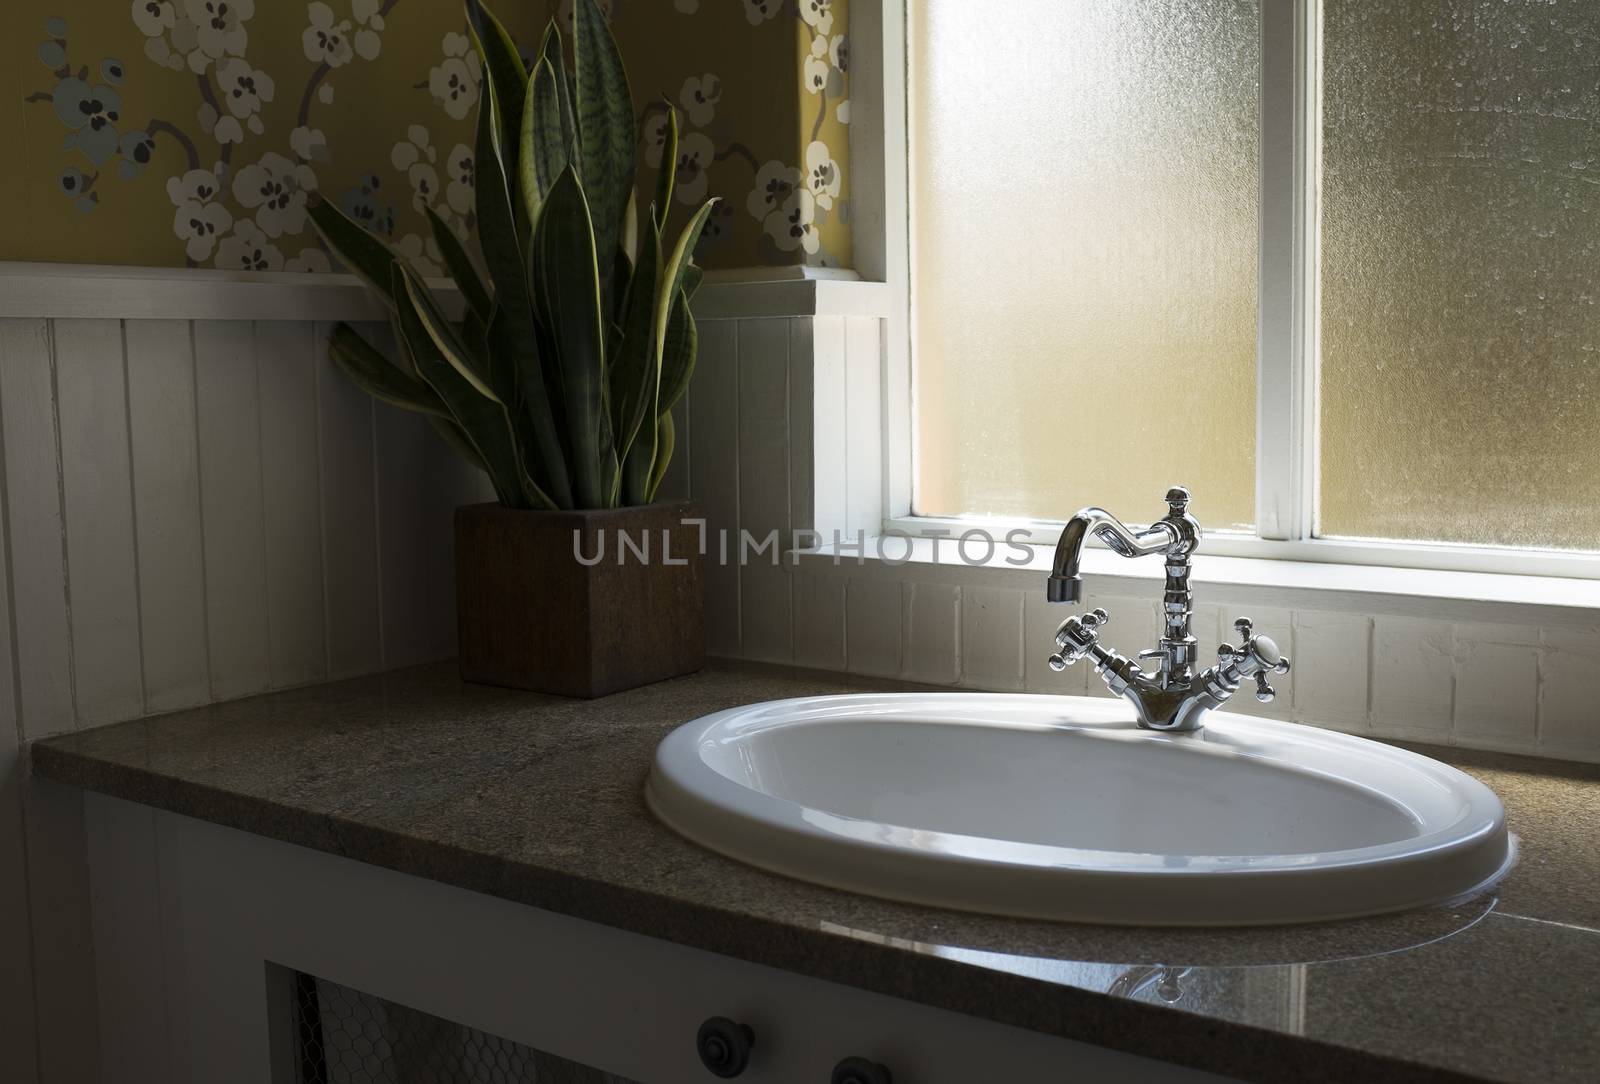 Old retro water tap basin in modern bathroom toilet with window